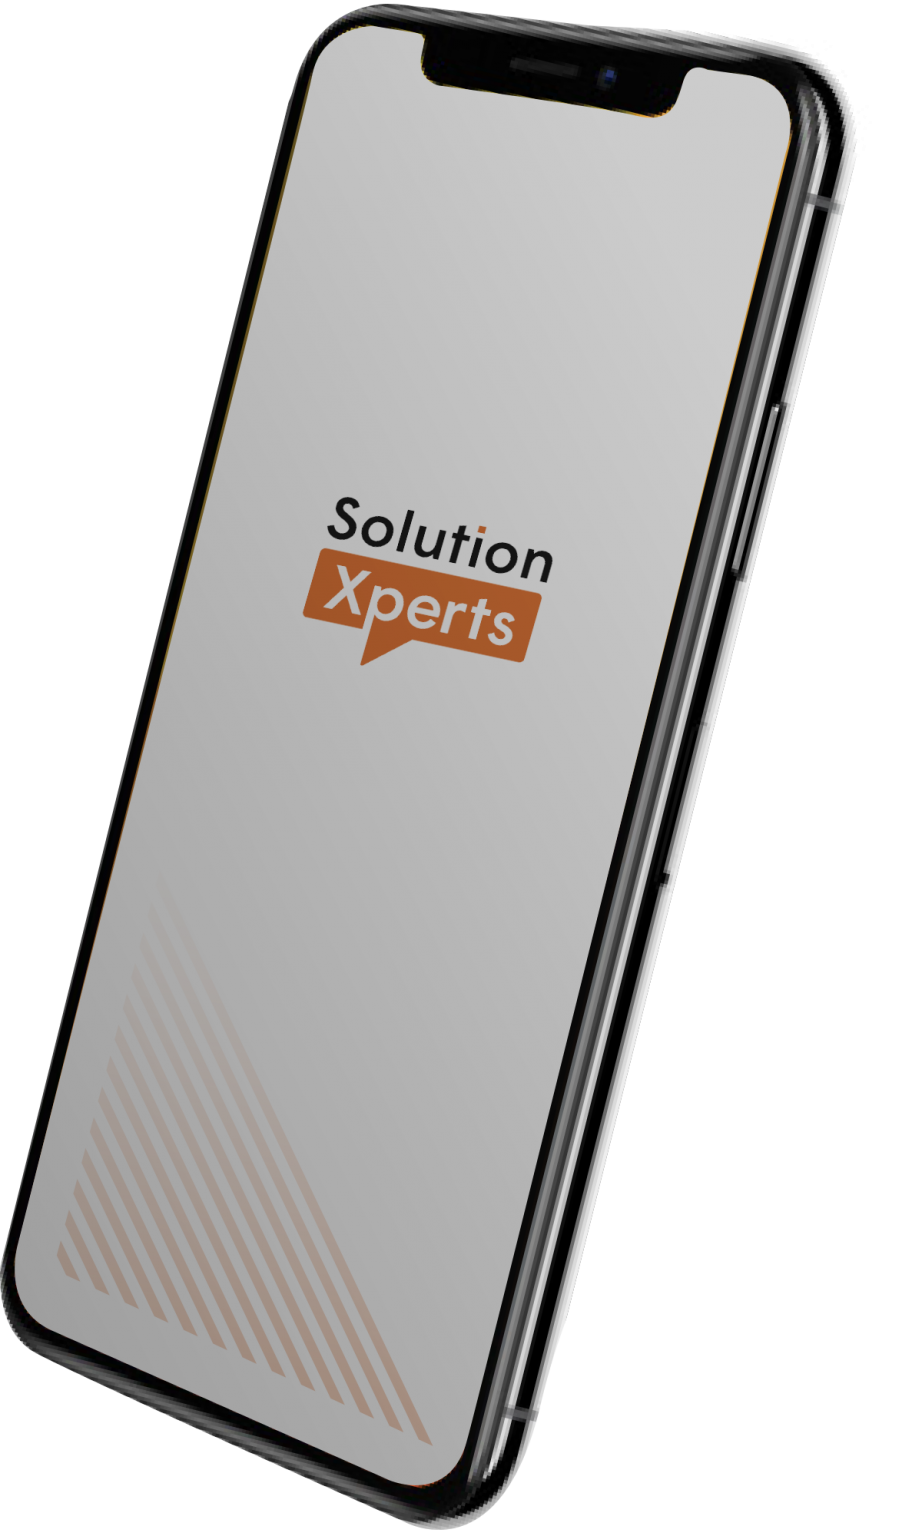 Smartphone med Solution Xperts logotyp